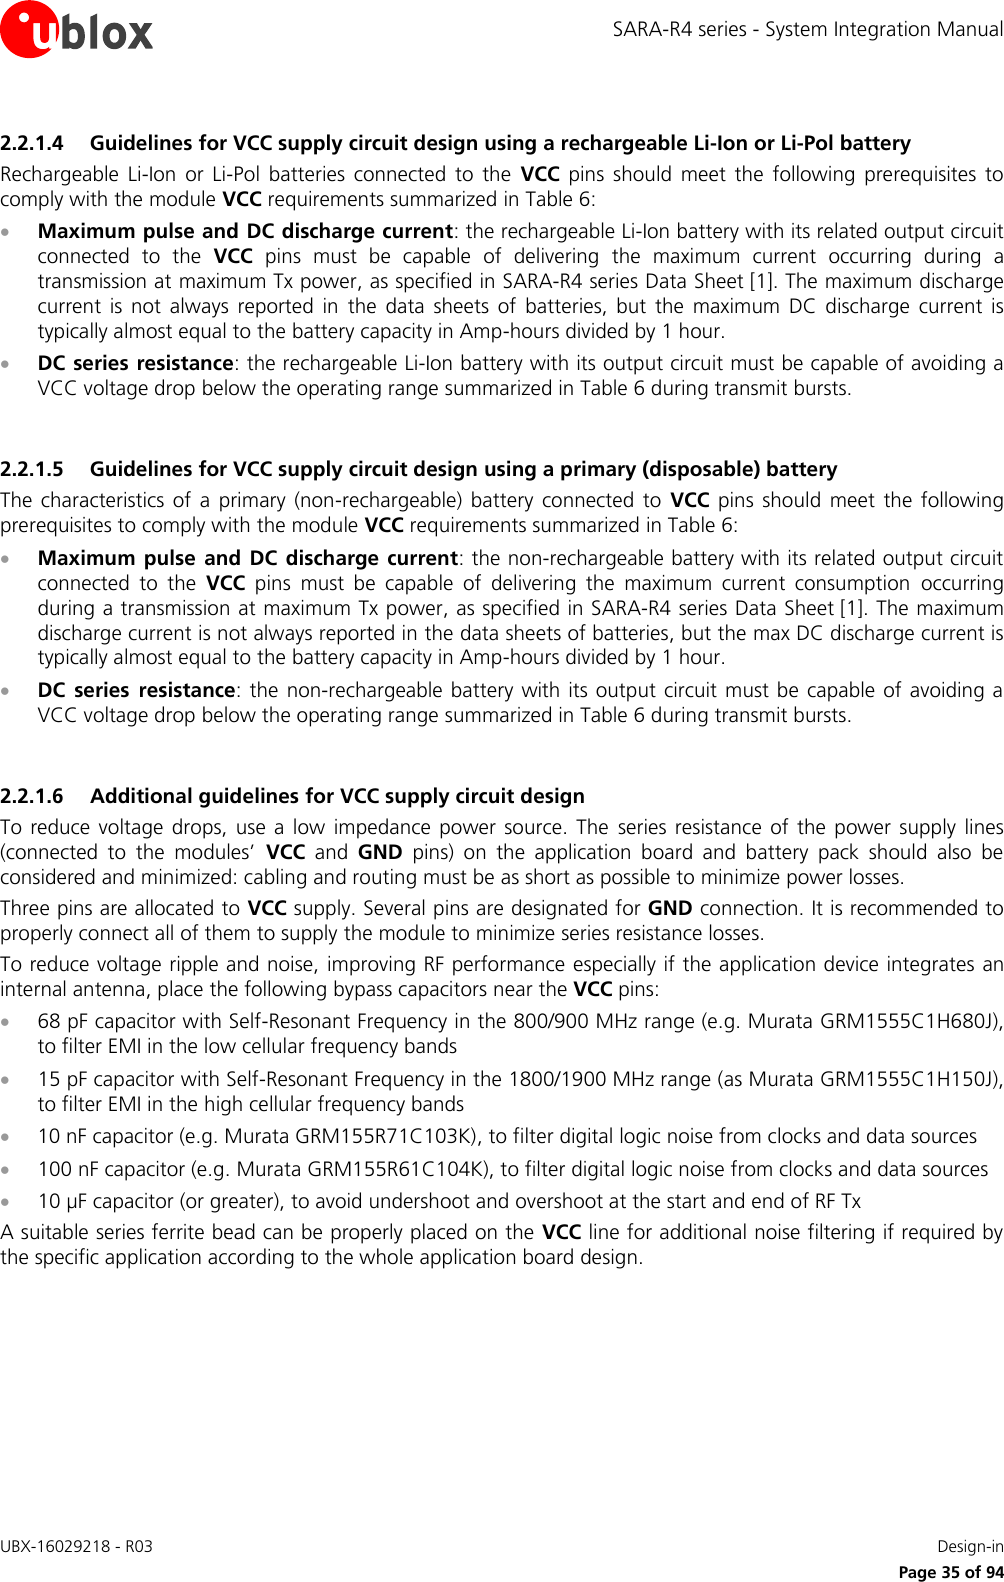 SARA-R4 series - System Integration Manual UBX-16029218 - R03    Design-in     Page 35 of 94 2.2.1.4 Guidelines for VCC supply circuit design using a rechargeable Li-Ion or Li-Pol battery Rechargeable  Li-Ion  or  Li-Pol  batteries  connected  to  the  VCC  pins  should  meet  the  following  prerequisites  to comply with the module VCC requirements summarized in Table 6:  Maximum pulse and DC discharge current: the rechargeable Li-Ion battery with its related output circuit connected  to  the  VCC  pins  must  be  capable  of  delivering  the  maximum  current  occurring  during  a transmission at maximum Tx power, as specified in SARA-R4 series Data Sheet [1]. The maximum discharge current  is  not  always  reported  in  the  data  sheets  of  batteries,  but  the  maximum  DC  discharge  current  is typically almost equal to the battery capacity in Amp-hours divided by 1 hour.  DC series resistance: the rechargeable Li-Ion battery with its output circuit must be capable of avoiding a VCC voltage drop below the operating range summarized in Table 6 during transmit bursts.  2.2.1.5 Guidelines for VCC supply circuit design using a primary (disposable) battery The  characteristics  of  a  primary  (non-rechargeable)  battery  connected  to  VCC  pins should  meet  the  following prerequisites to comply with the module VCC requirements summarized in Table 6:  Maximum  pulse  and  DC  discharge current: the non-rechargeable battery with its related output circuit connected  to  the  VCC  pins  must  be  capable  of  delivering  the  maximum  current  consumption  occurring during a transmission at maximum Tx power, as specified in SARA-R4 series Data Sheet [1]. The maximum discharge current is not always reported in the data sheets of batteries, but the max DC discharge current is typically almost equal to the battery capacity in Amp-hours divided by 1 hour.  DC  series  resistance: the  non-rechargeable  battery with its output circuit must be capable  of  avoiding a VCC voltage drop below the operating range summarized in Table 6 during transmit bursts.  2.2.1.6 Additional guidelines for VCC supply circuit design To reduce  voltage  drops,  use  a  low  impedance  power  source. The  series  resistance  of the  power supply  lines (connected  to  the  modules’  VCC  and  GND  pins)  on  the  application  board  and  battery  pack  should  also  be considered and minimized: cabling and routing must be as short as possible to minimize power losses. Three pins are allocated to VCC supply. Several pins are designated for GND connection. It is recommended to properly connect all of them to supply the module to minimize series resistance losses. To reduce voltage ripple and noise, improving RF performance especially if the application device integrates an internal antenna, place the following bypass capacitors near the VCC pins:  68 pF capacitor with Self-Resonant Frequency in the 800/900 MHz range (e.g. Murata GRM1555C1H680J), to filter EMI in the low cellular frequency bands   15 pF capacitor with Self-Resonant Frequency in the 1800/1900 MHz range (as Murata GRM1555C1H150J), to filter EMI in the high cellular frequency bands   10 nF capacitor (e.g. Murata GRM155R71C103K), to filter digital logic noise from clocks and data sources  100 nF capacitor (e.g. Murata GRM155R61C104K), to filter digital logic noise from clocks and data sources  10 µF capacitor (or greater), to avoid undershoot and overshoot at the start and end of RF Tx  A suitable series ferrite bead can be properly placed on the VCC line for additional noise filtering if required by the specific application according to the whole application board design.  